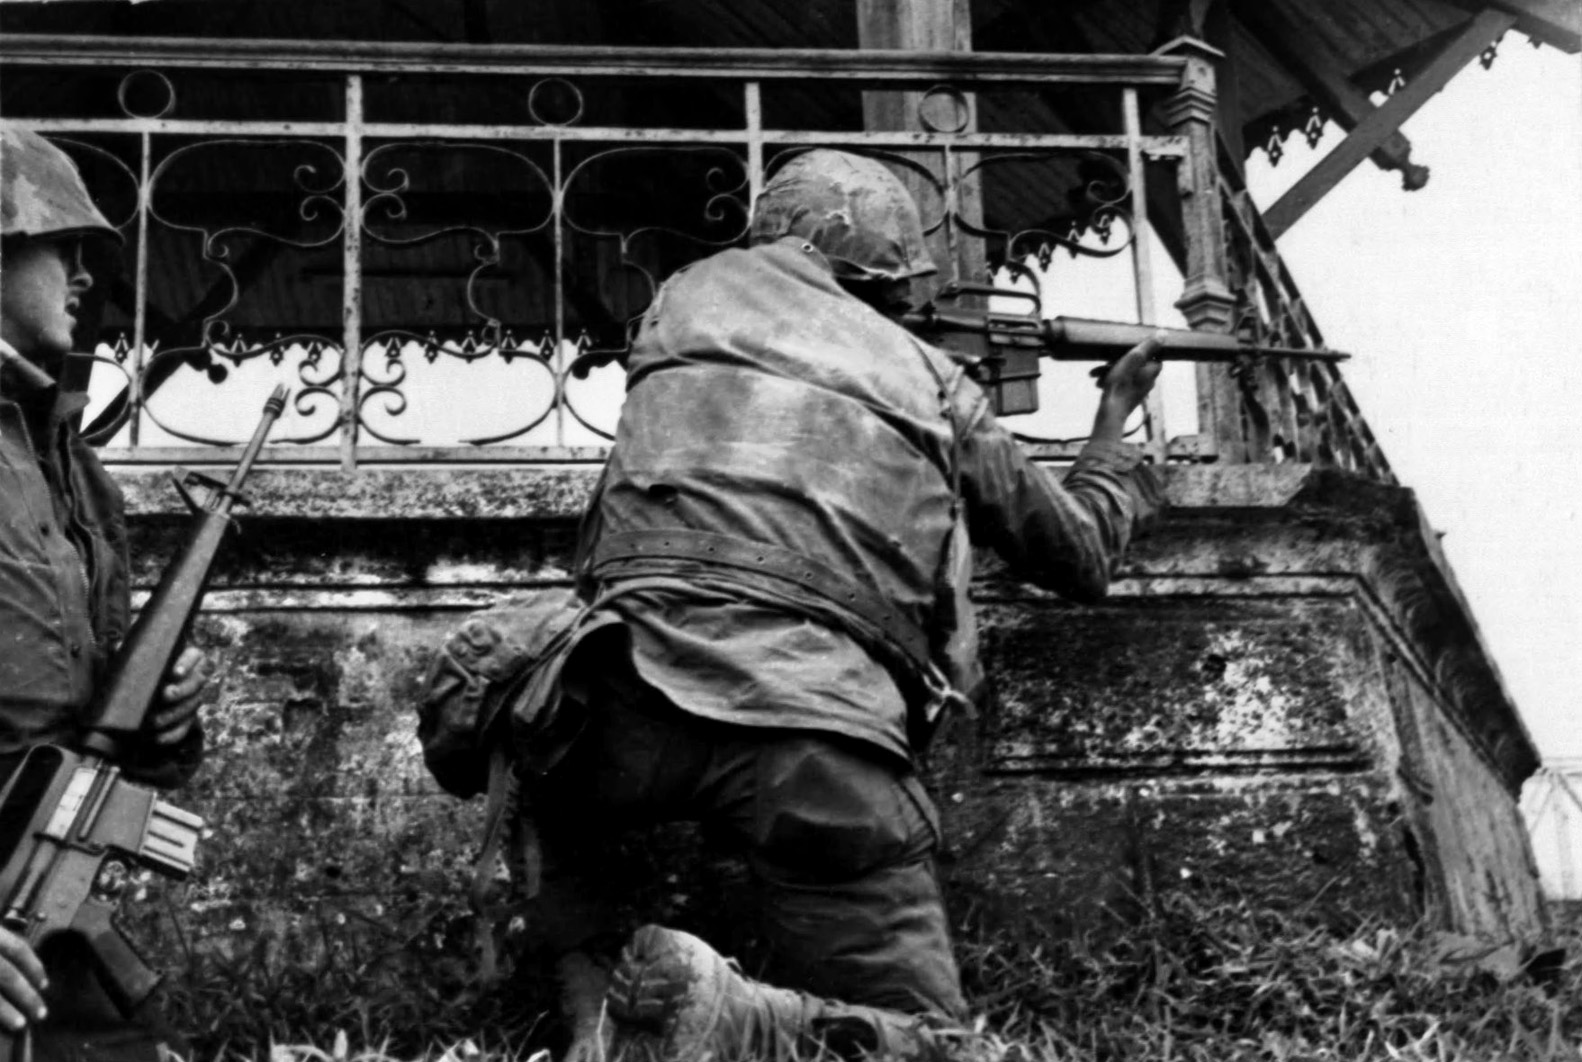 A Marine on the south bank of the Perfume River fires towards the citadel on the north bank. After securing the MACV compound, Canley and his fellow Marines had to pry heavily armed North Vietnamese soldiers from buildings in the residential sector.  